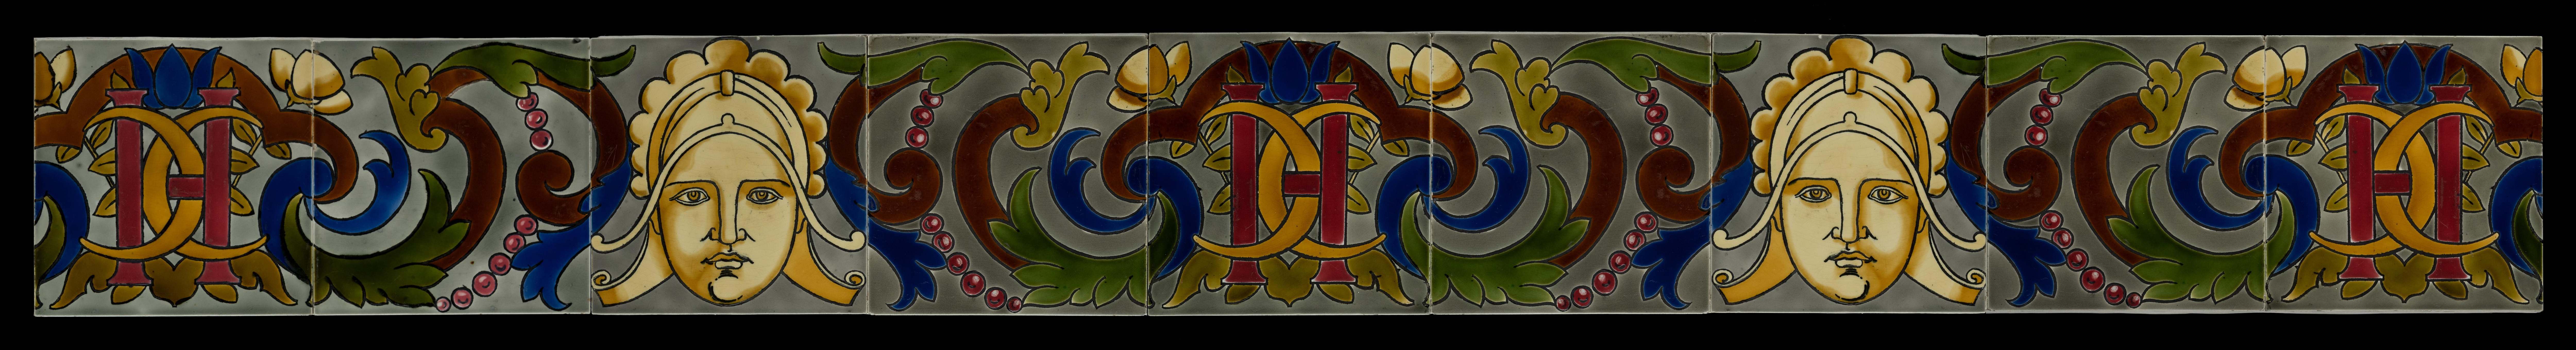 A set of nine beautiful art nouveau wall tiles, divided into three sets of three tiles each mounted on a wooden board. Each individual tile is 8